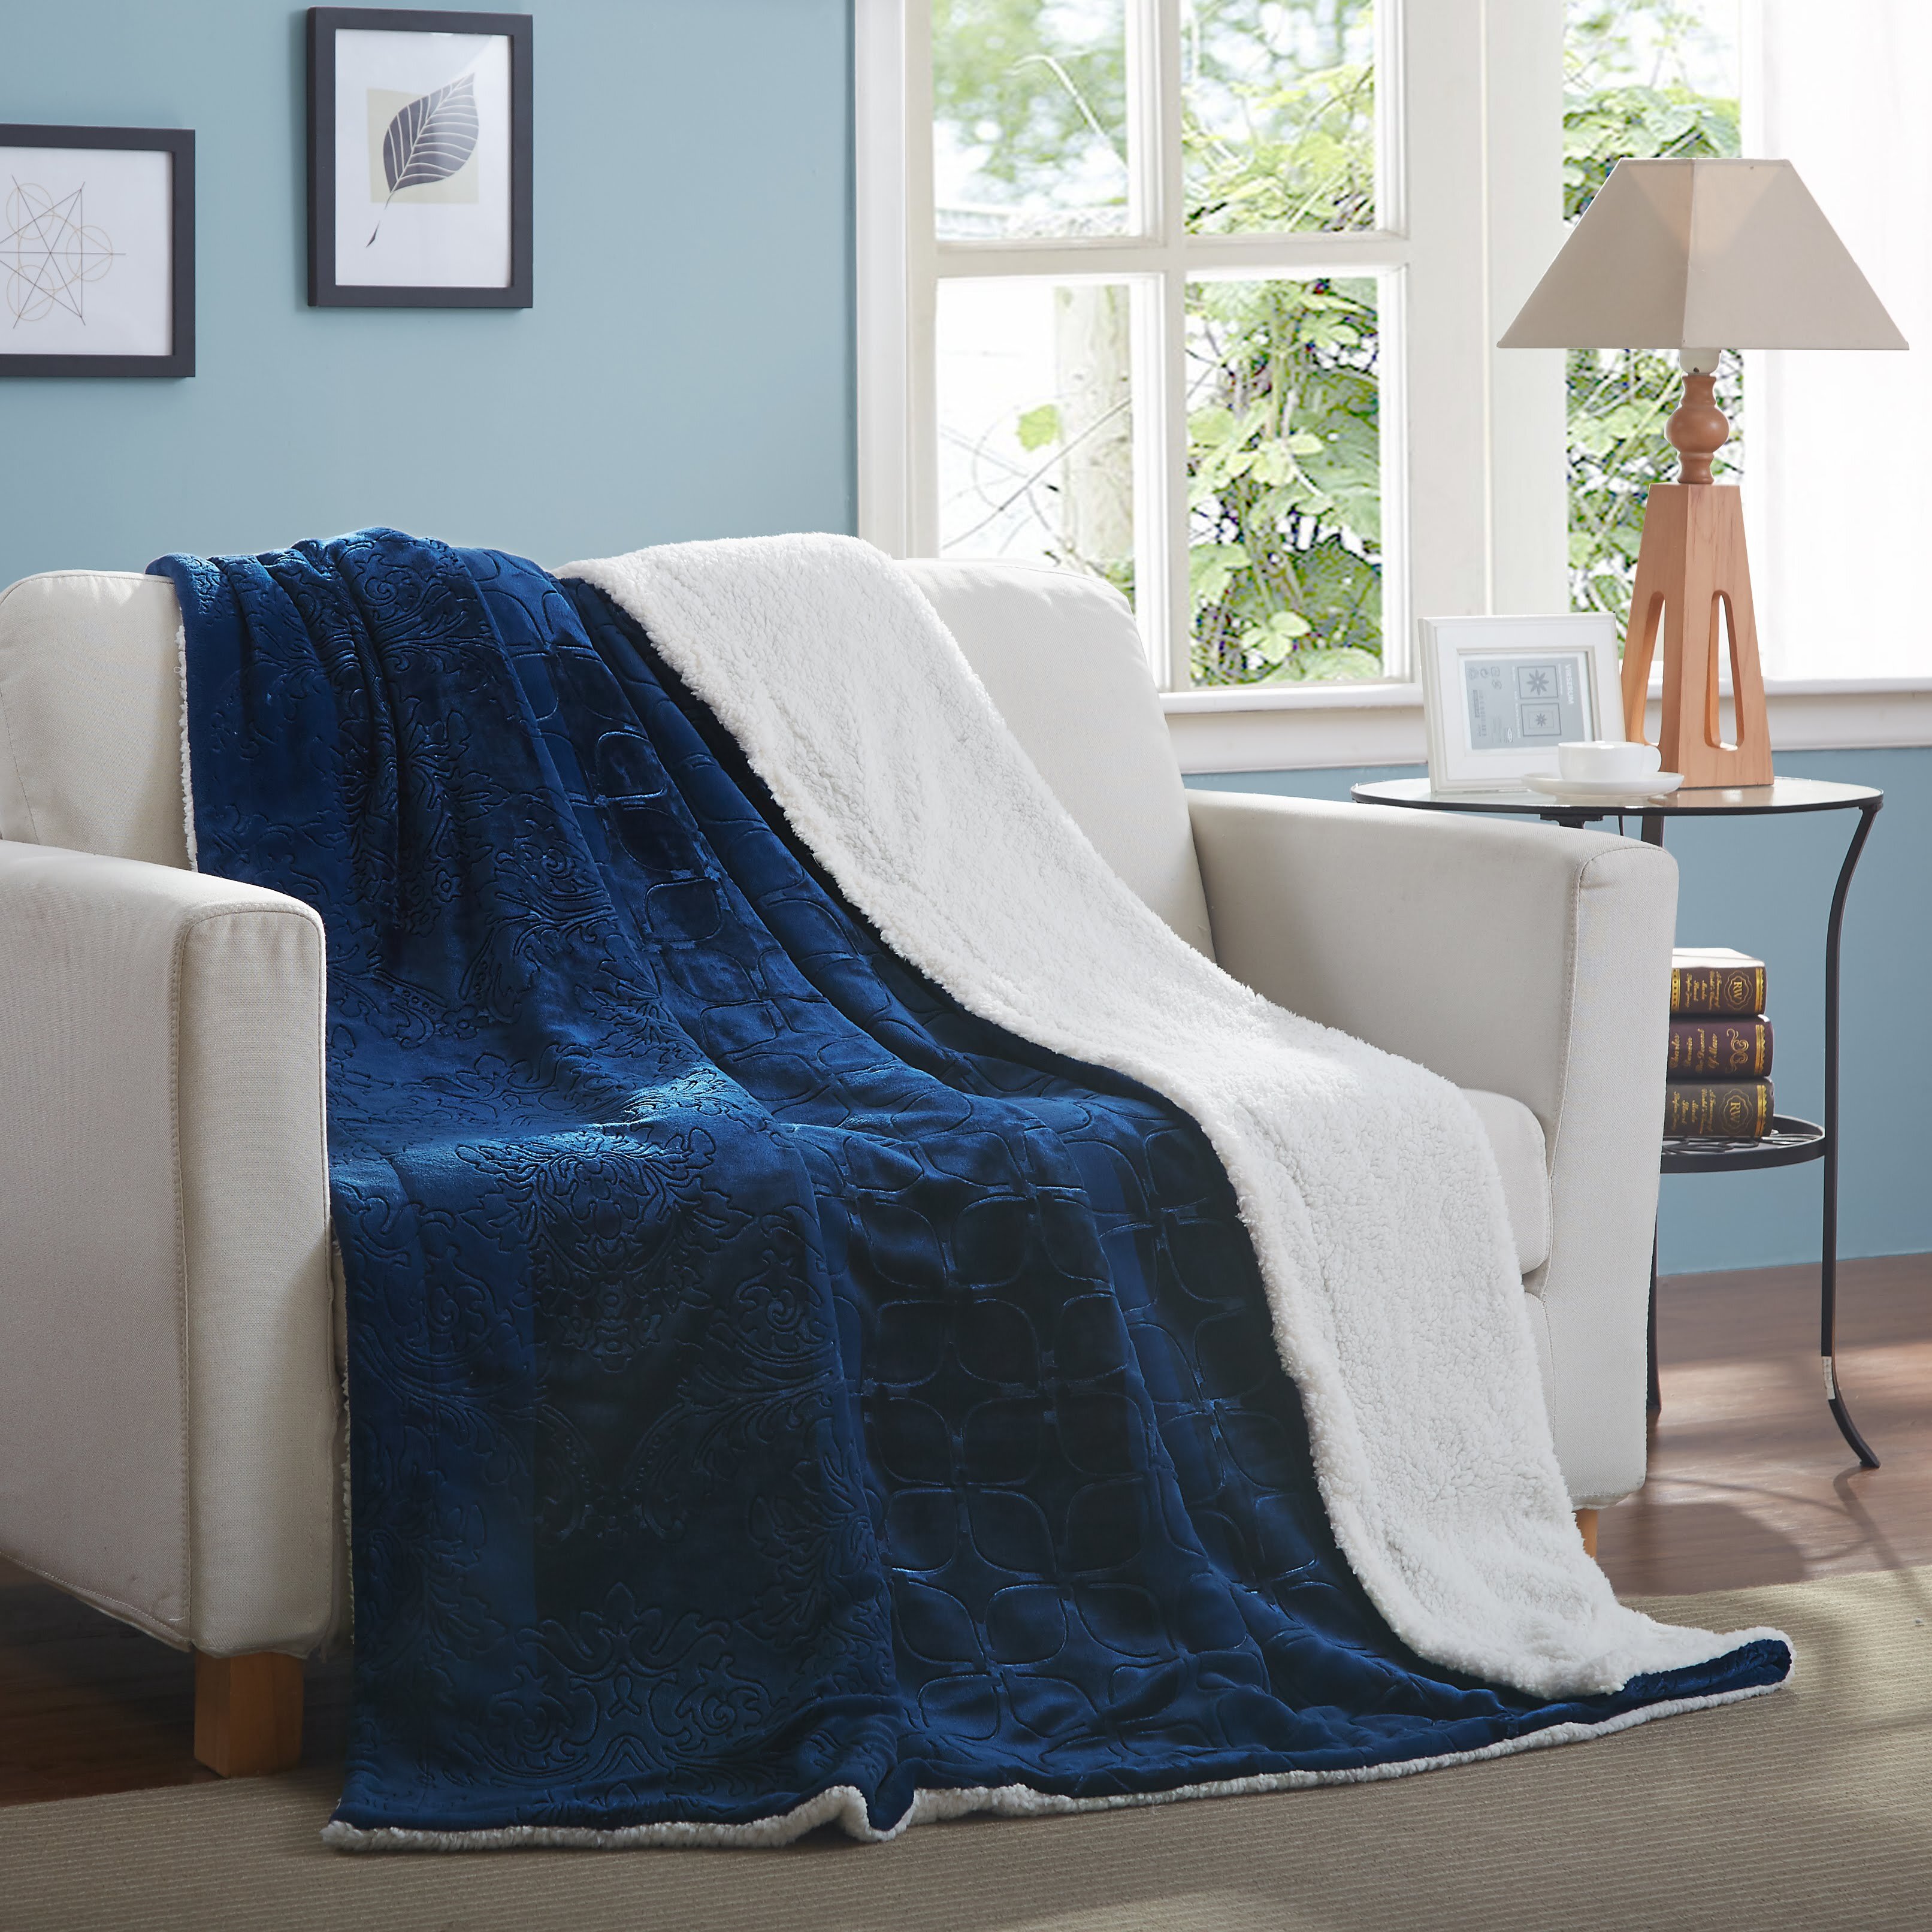 T&H XHome Sherpa Throw Blanket Colorful Lips Blue Pattern Bedding Blankets 50x60IN Cozy Soft Warm Microfiber Fuzzy Blankets for Man Womans All Seasons